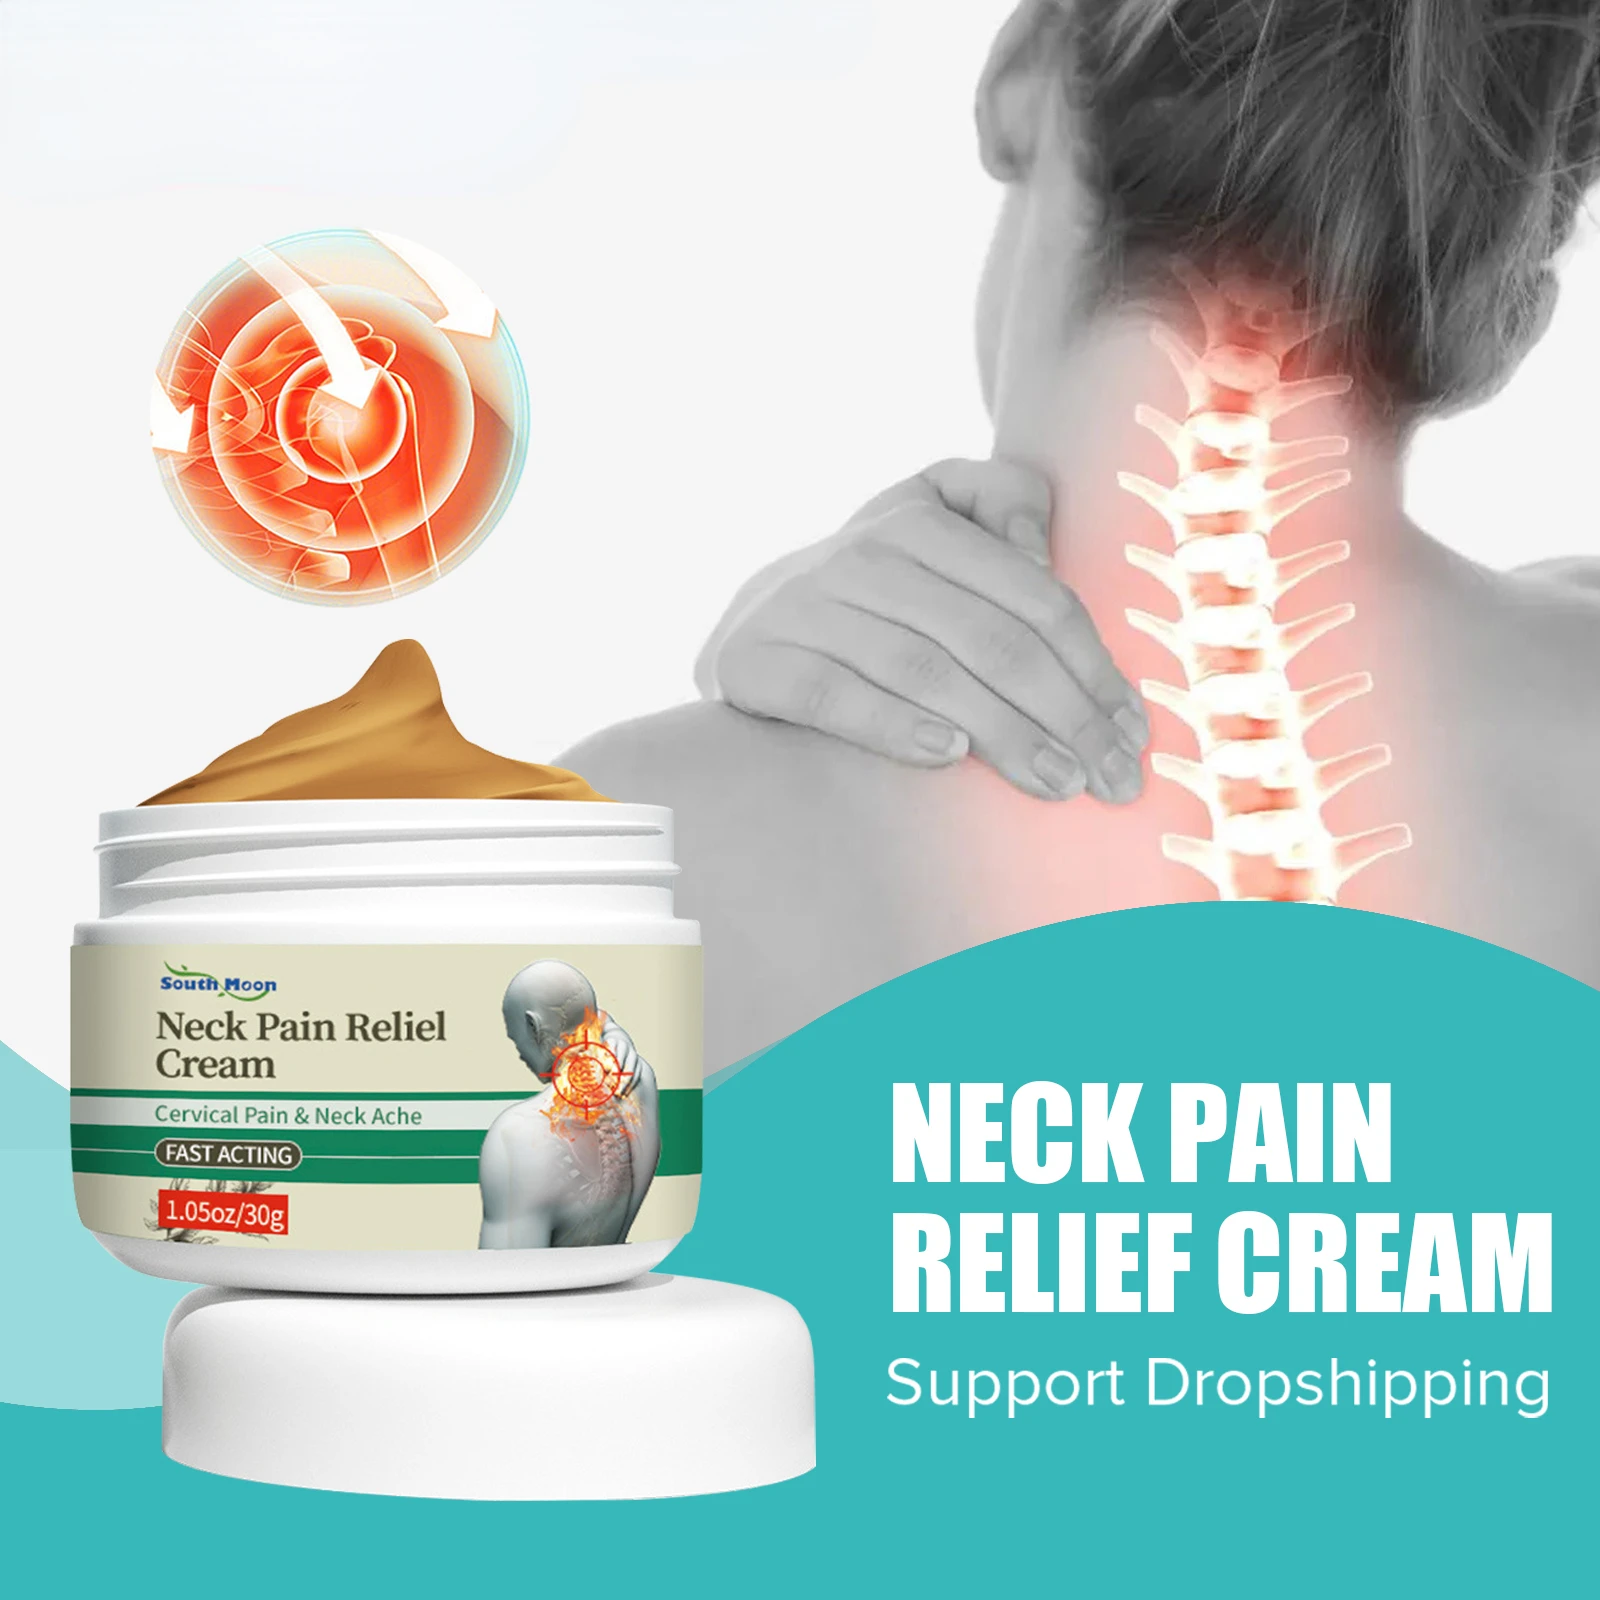 

South Moon Neck Pain Relief Cream Chinese Medical Analgesic Ointment for Rheumatoid Arthritis Joint Back Cervical Pain Cream 30g